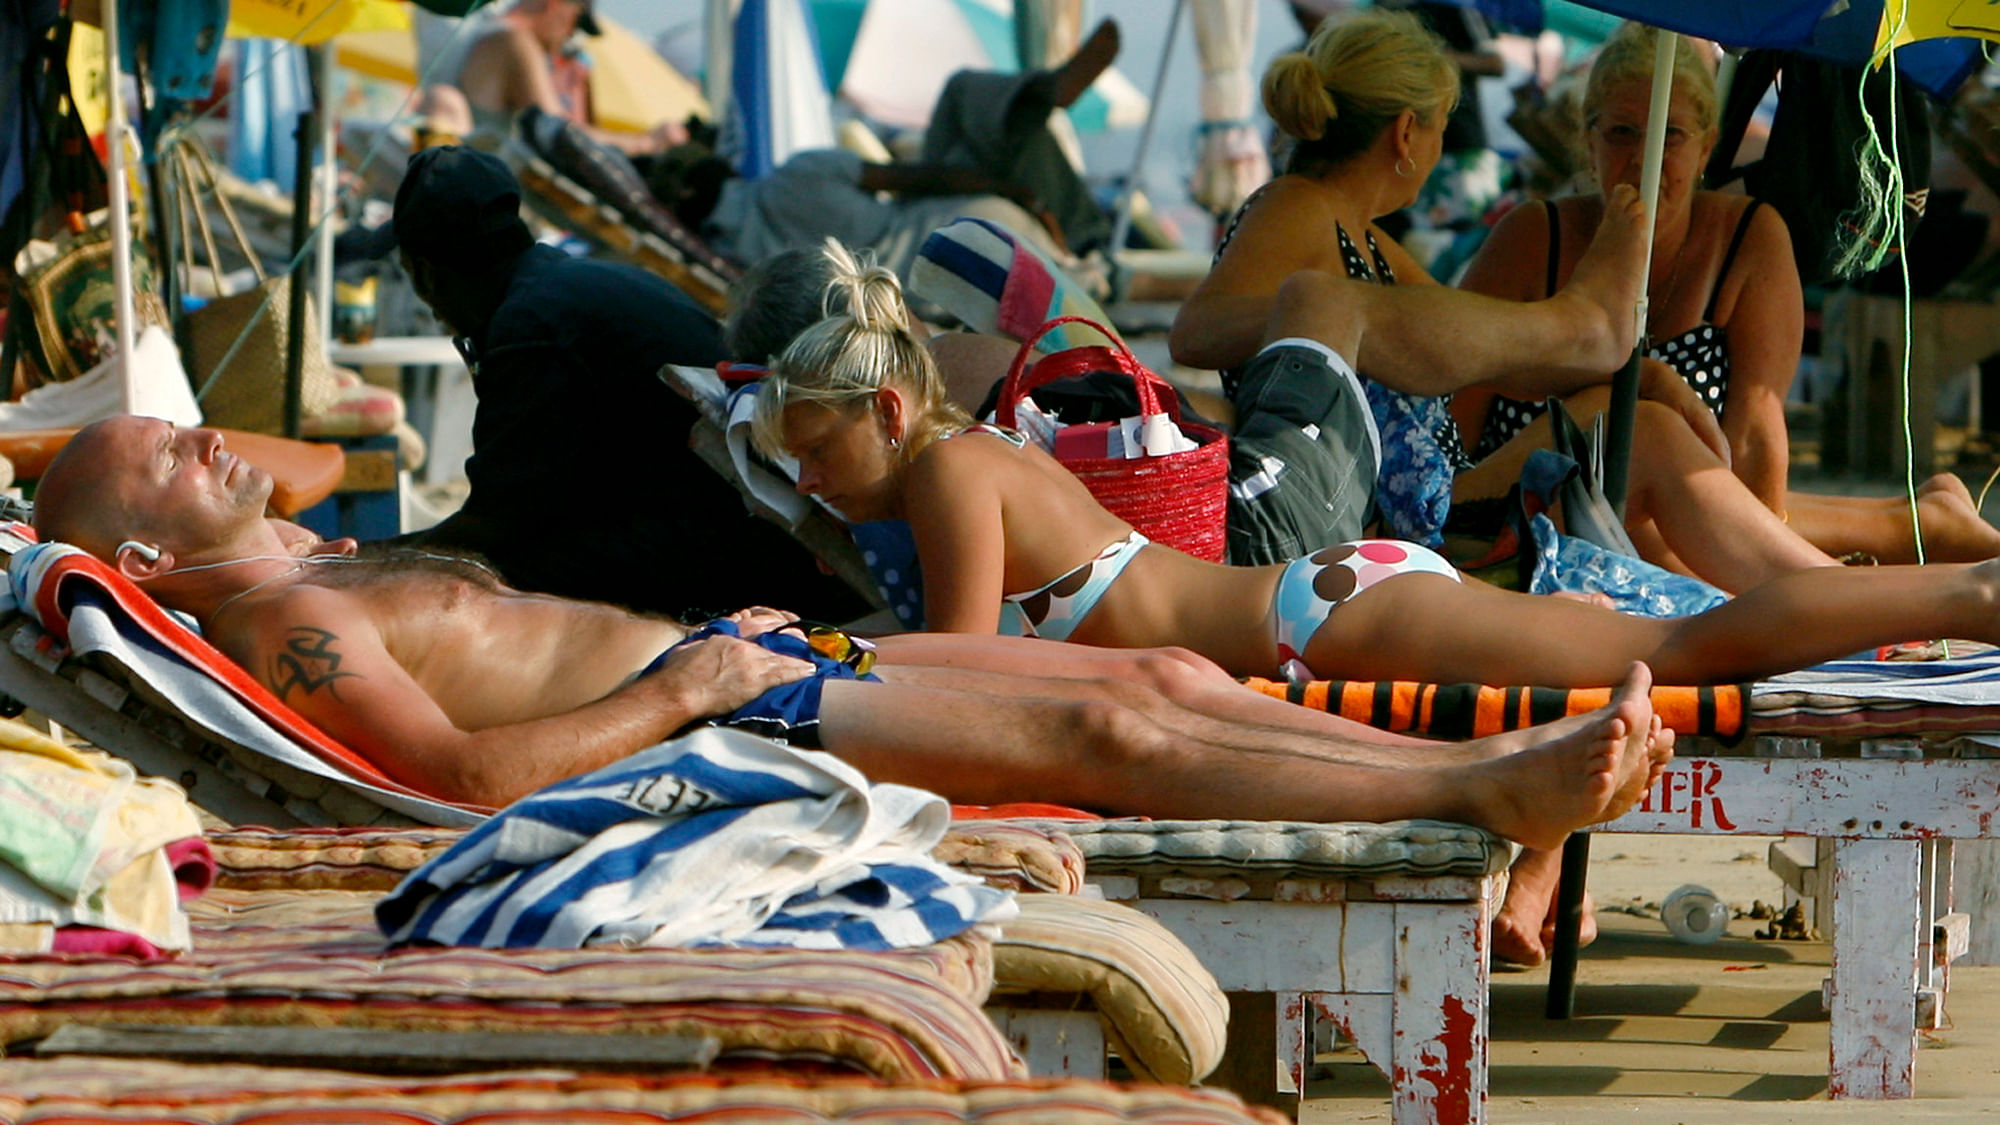 

Tourists relax at  Baga beach in Goa. (Photo: Reuters)